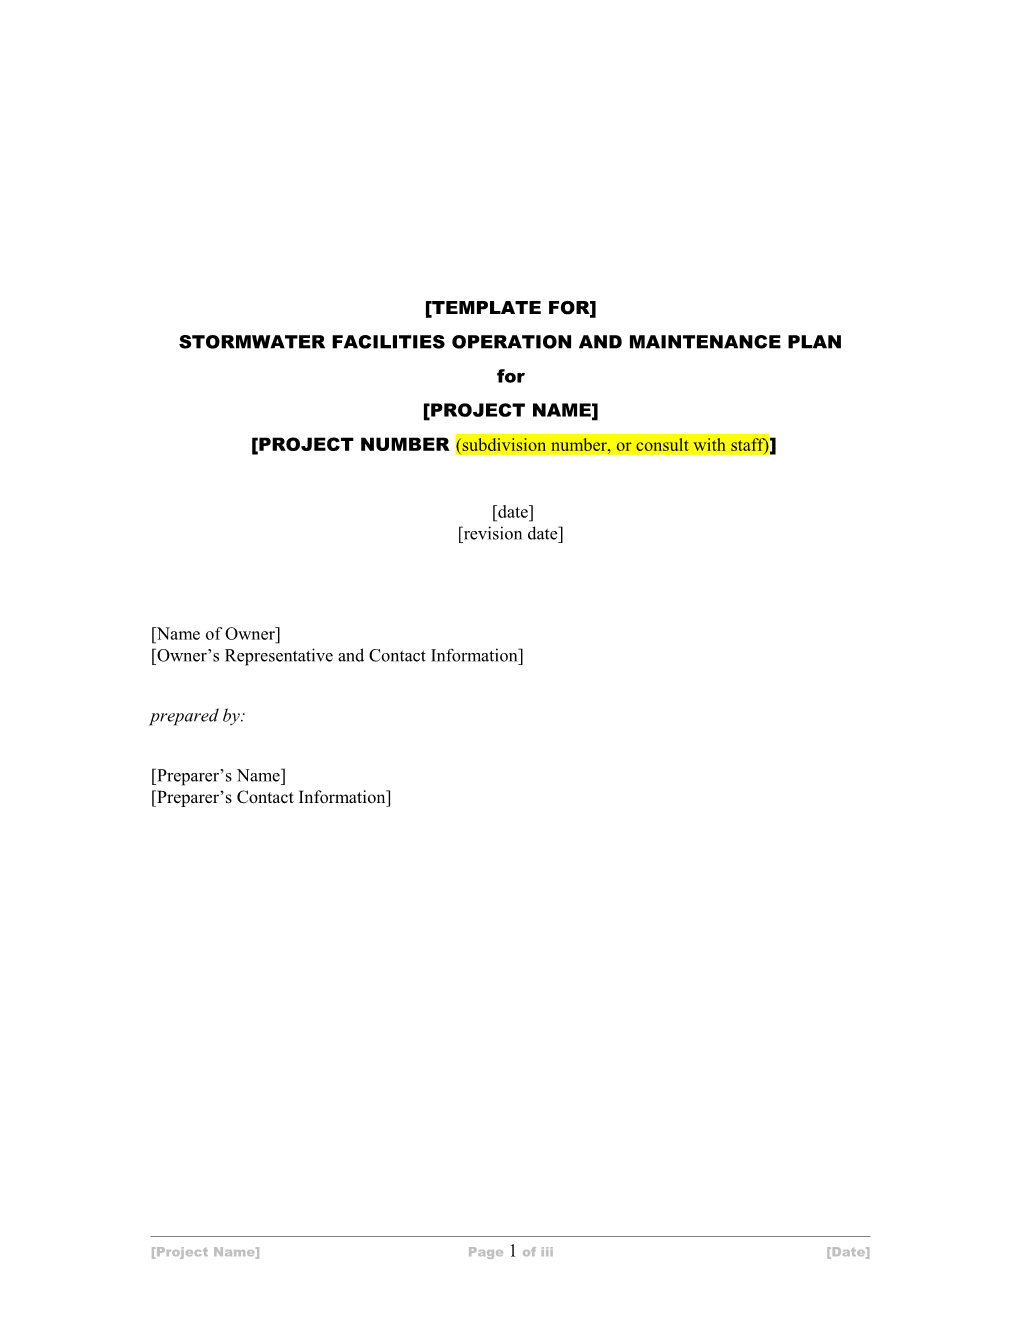 Stormwater Facilities Operation and Maintenance Plan